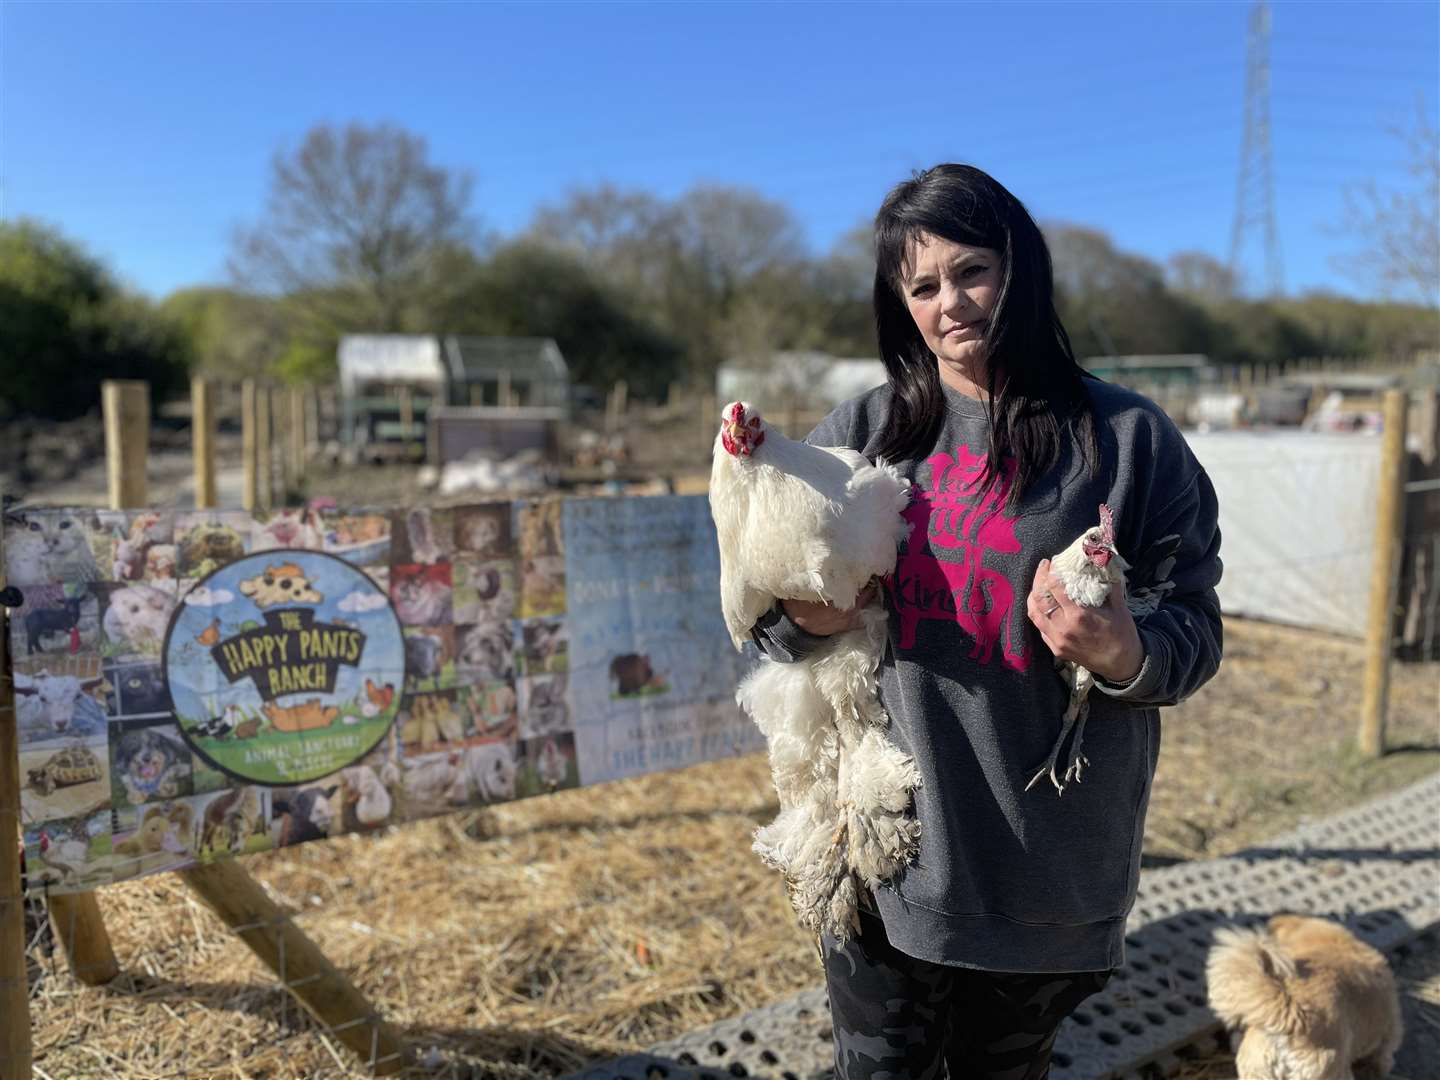 Founder Amey James, with Roosters, at The Happy Pants Ranch Animal Sanctuary in Iwade Lane, Bobbing